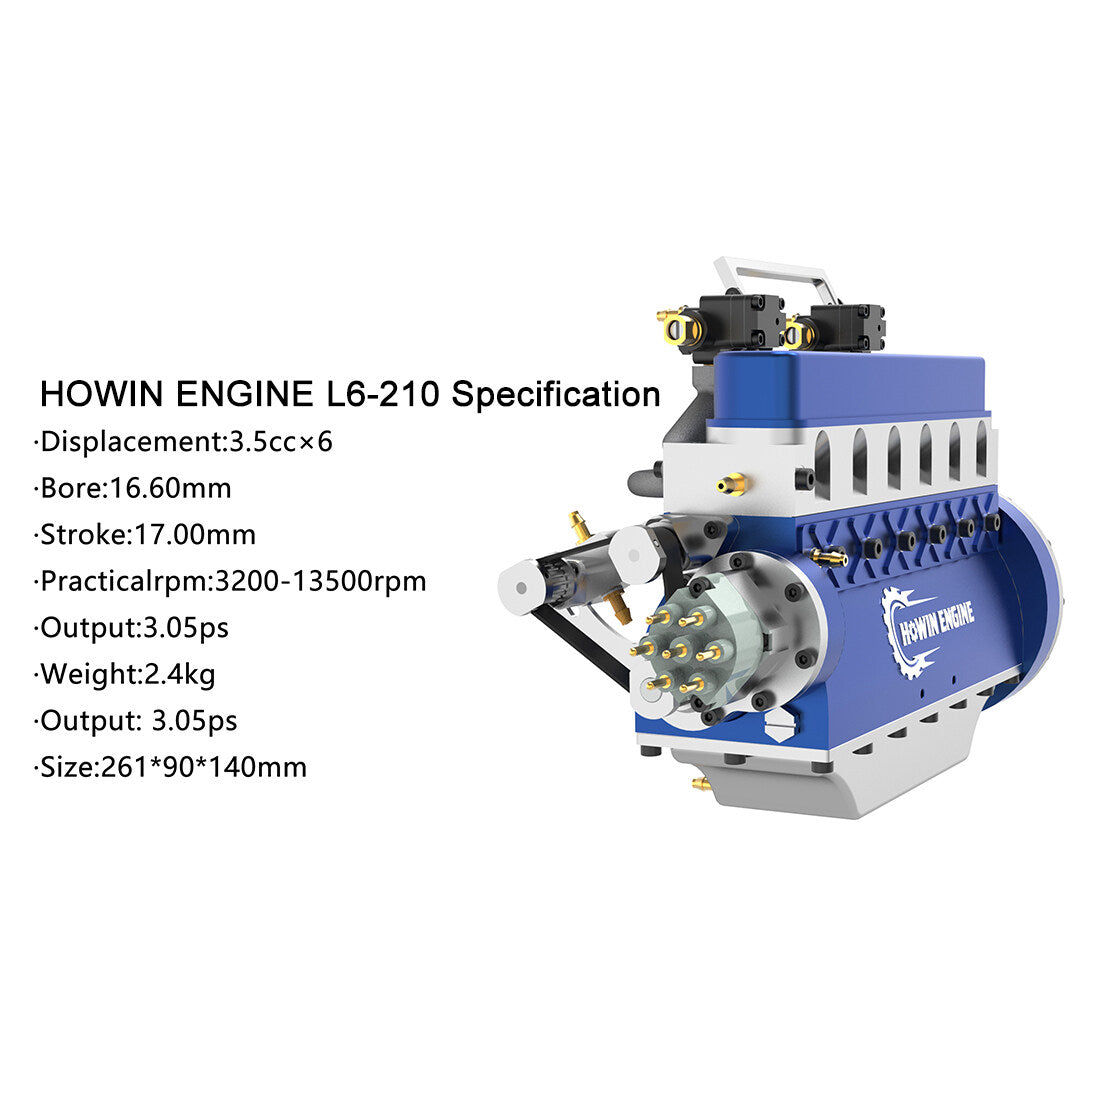 HOWIN ENGINE L6-210 1/8 21.0cc Mini Inline Six-cylinder Four-Stroke Water-cooled L6 Gasoline Engine Model for RC Cars Ships enginediyshop